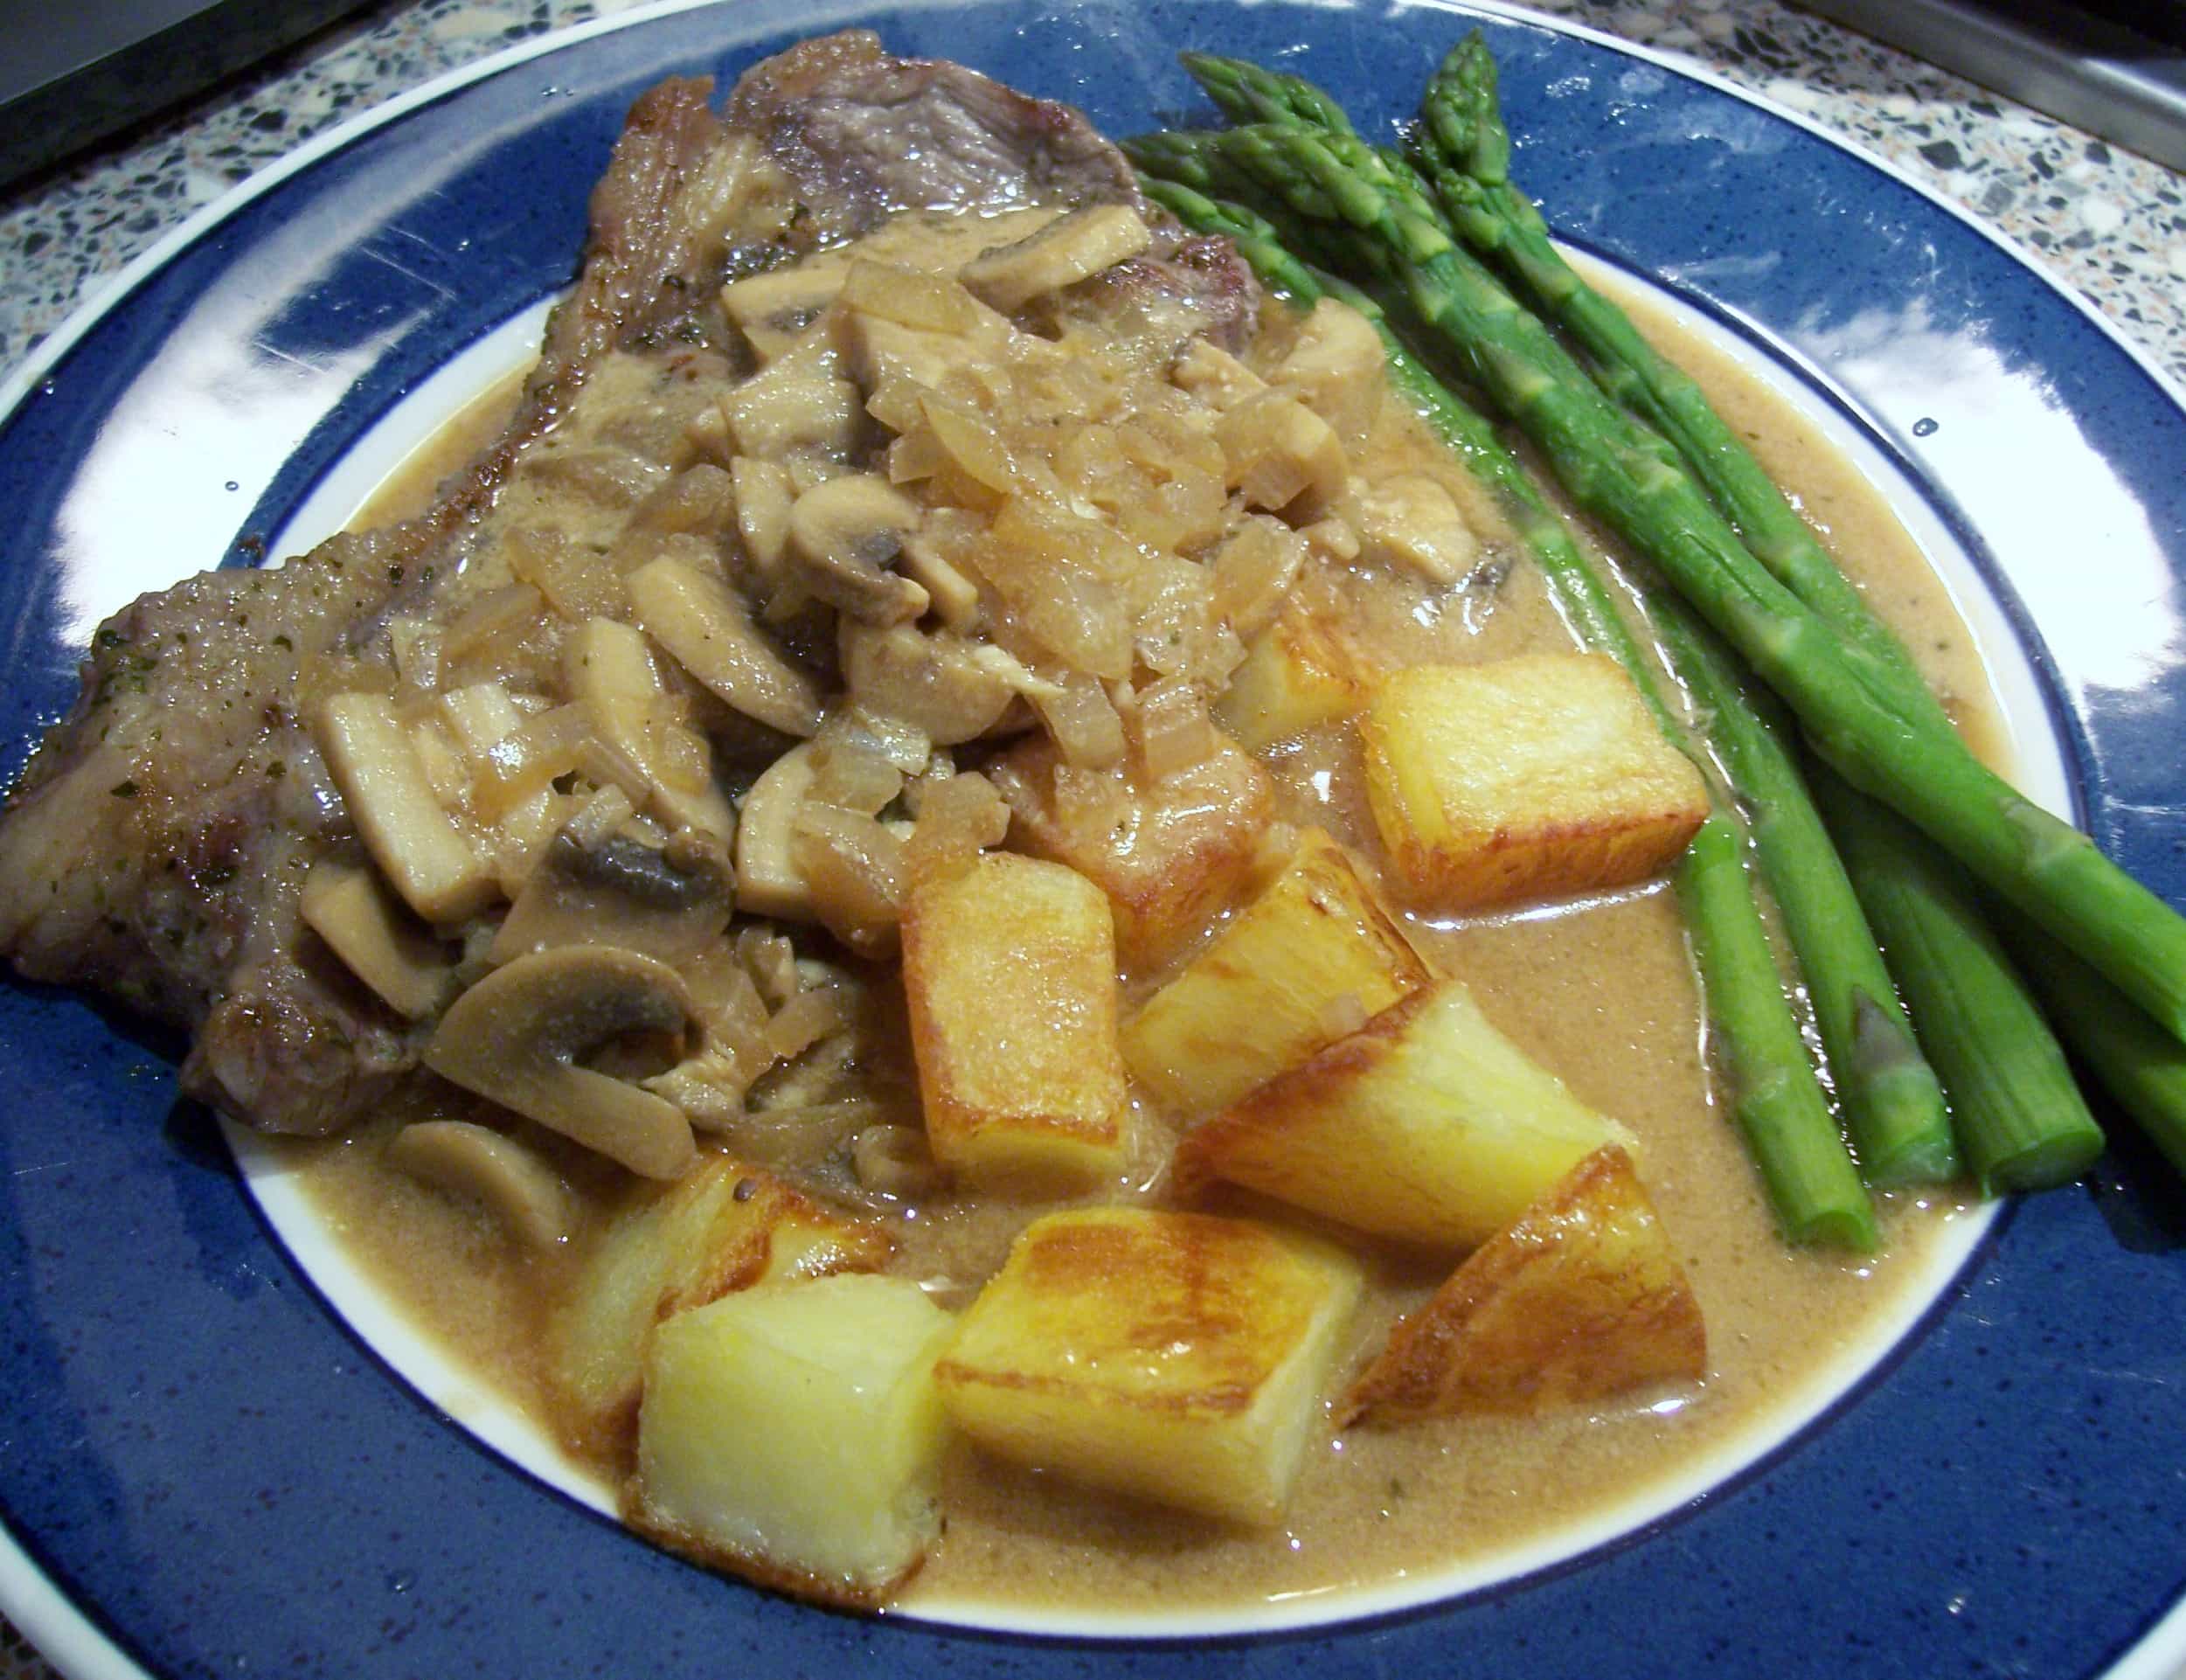 Steak with a creamy mushroom and whisky sauce with potatoes and asparagus